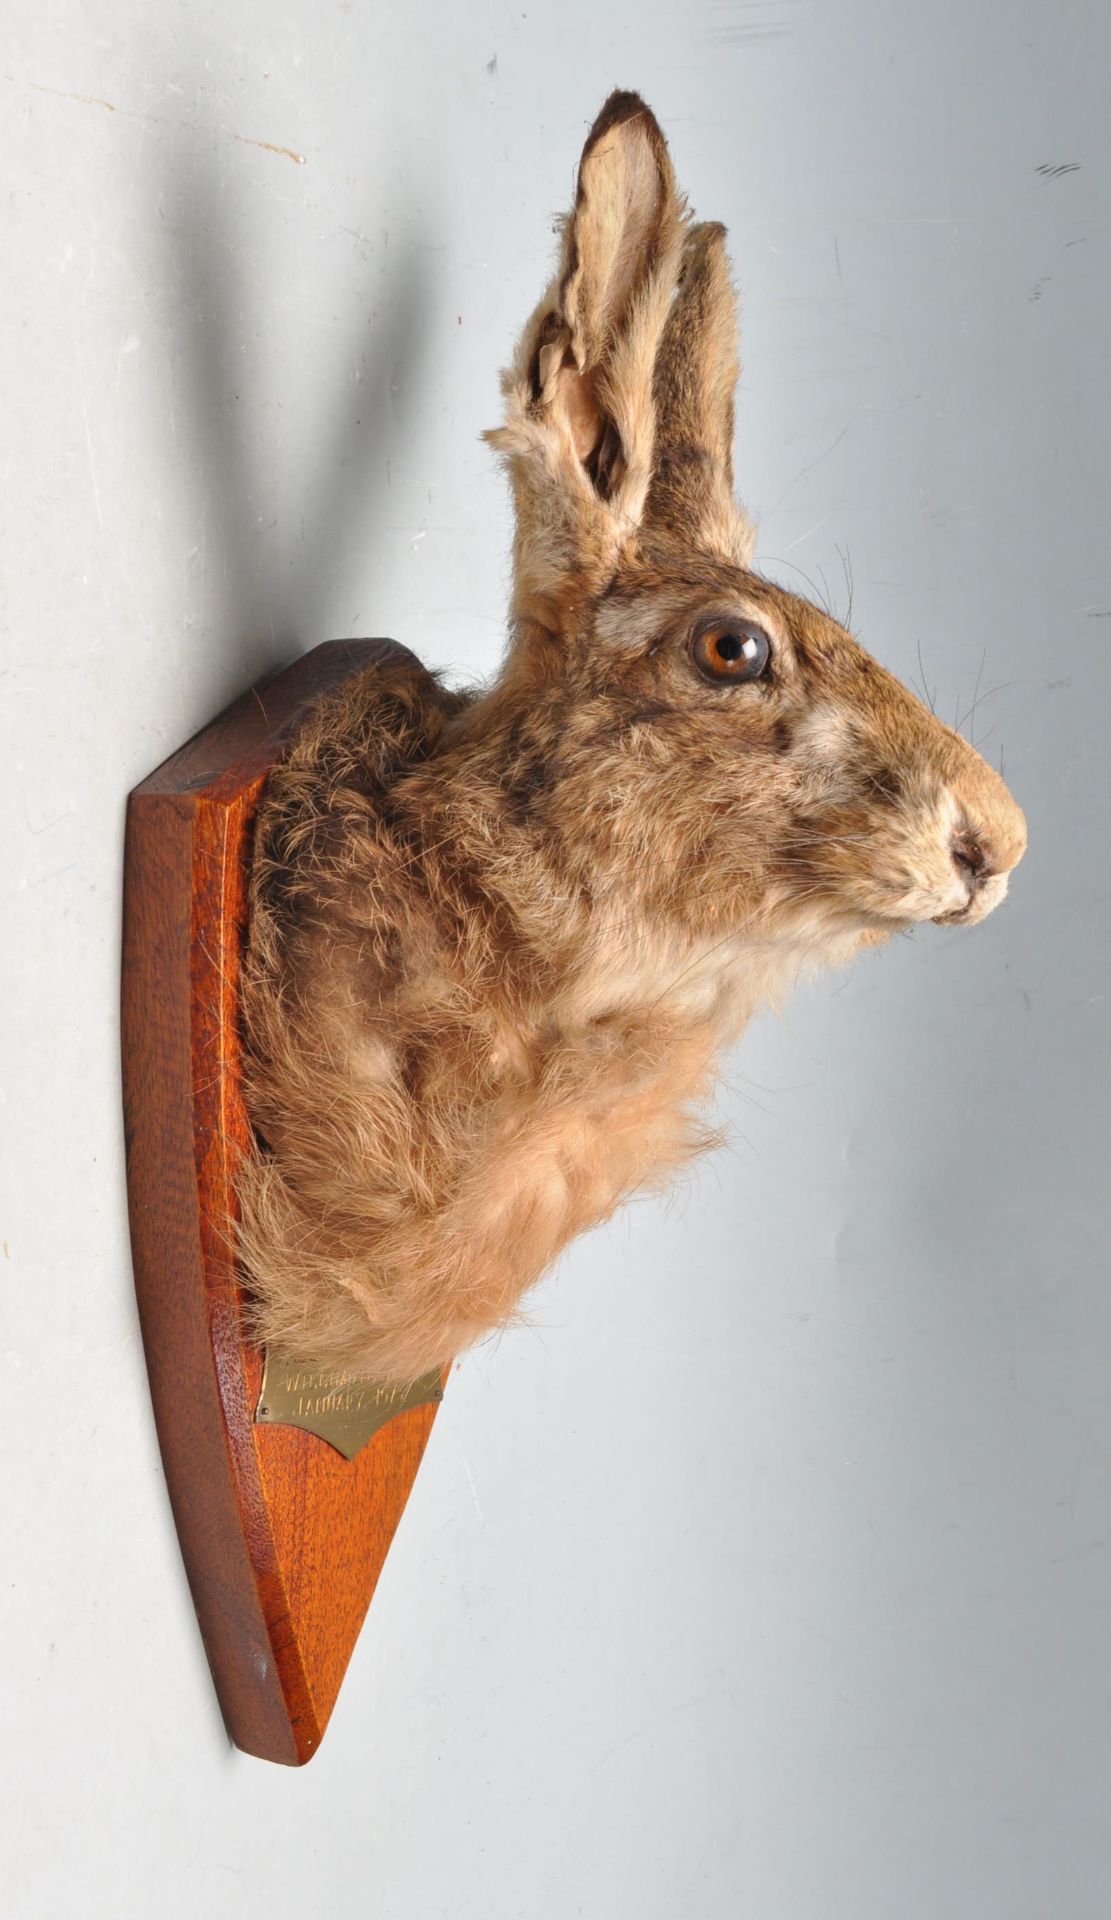 OF TAXIDERMY INTEREST - WALL MOUNTED HARES HEAD